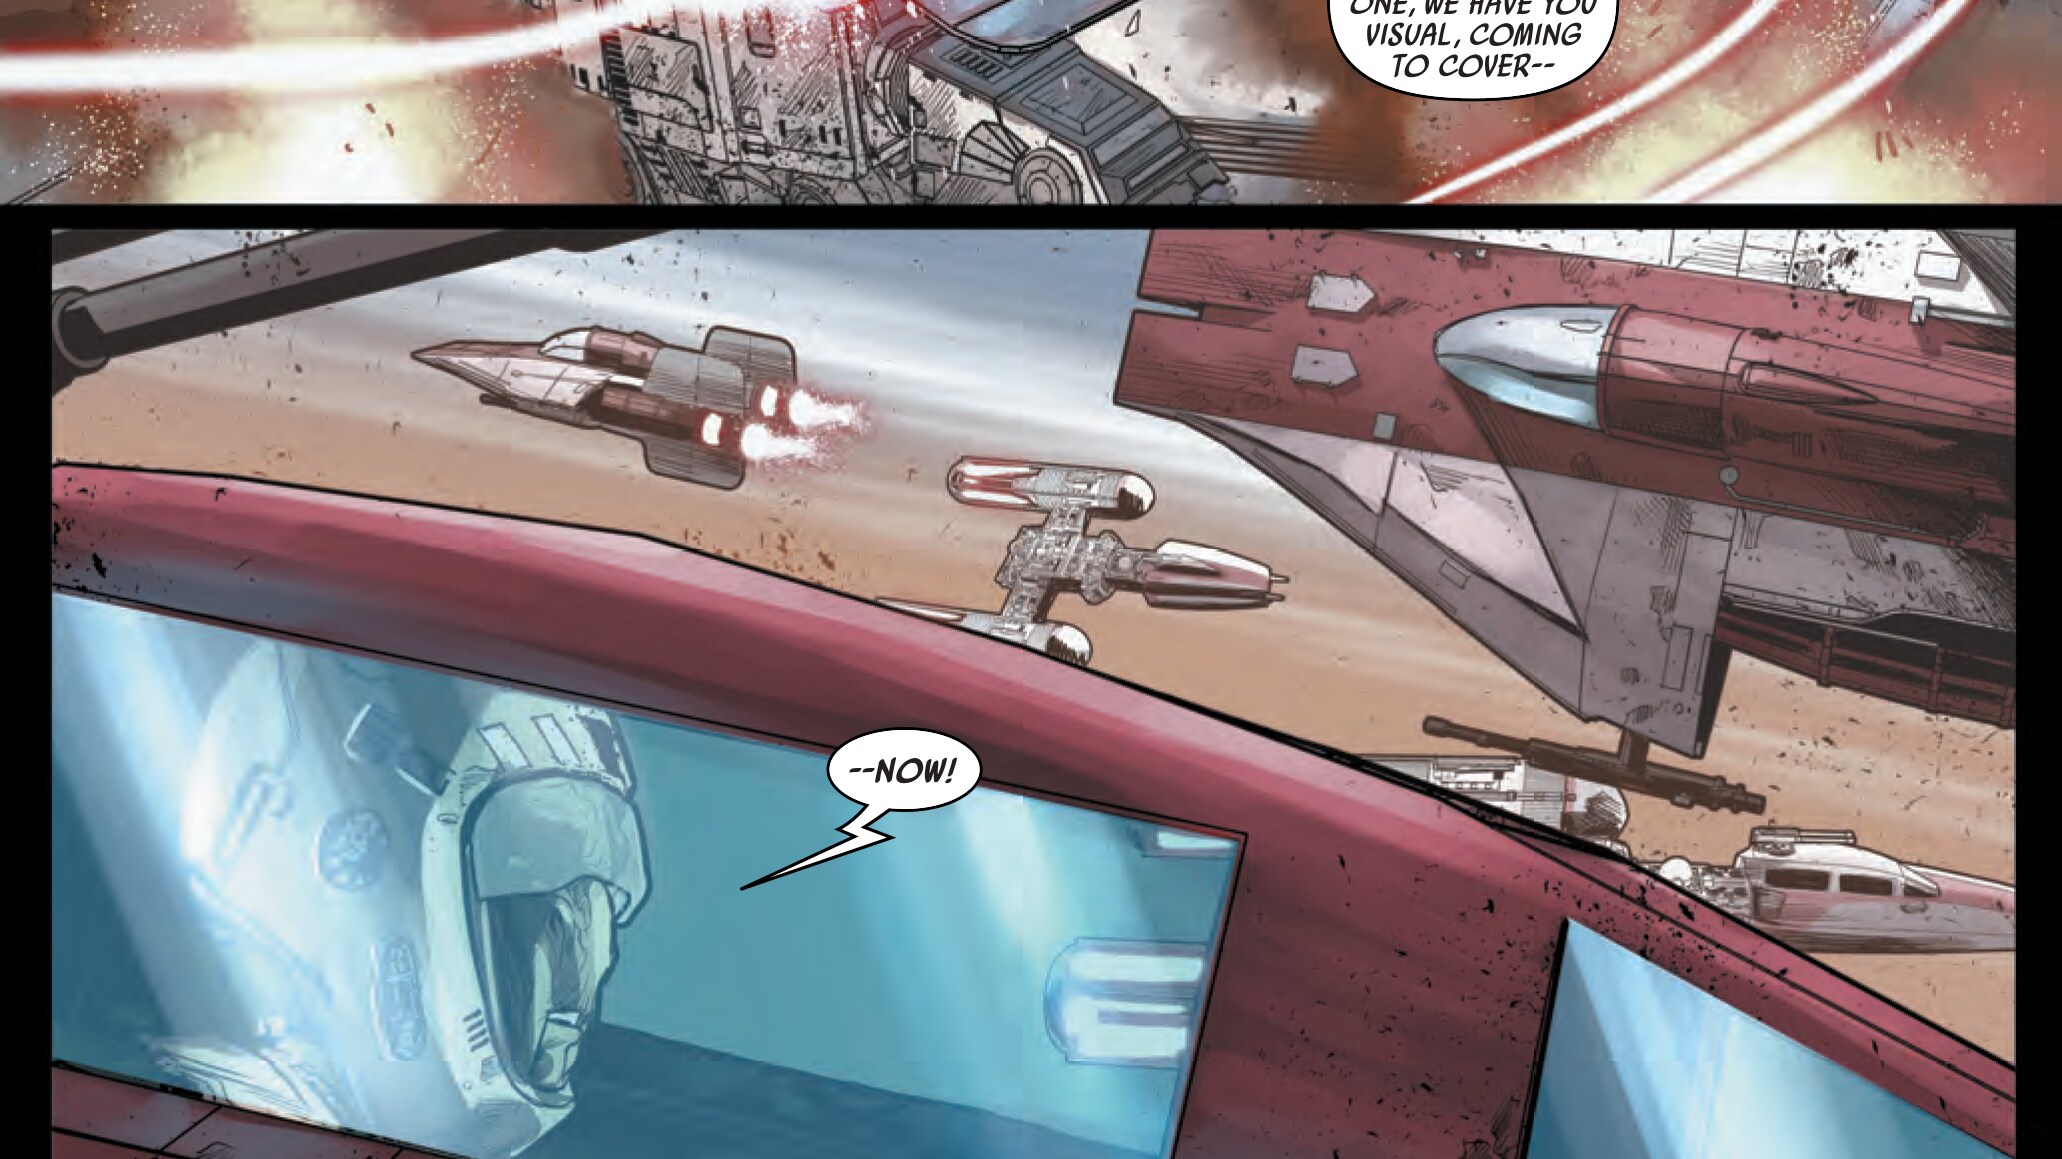 Star Wars Shattered Empire #2 - A-Wing attack